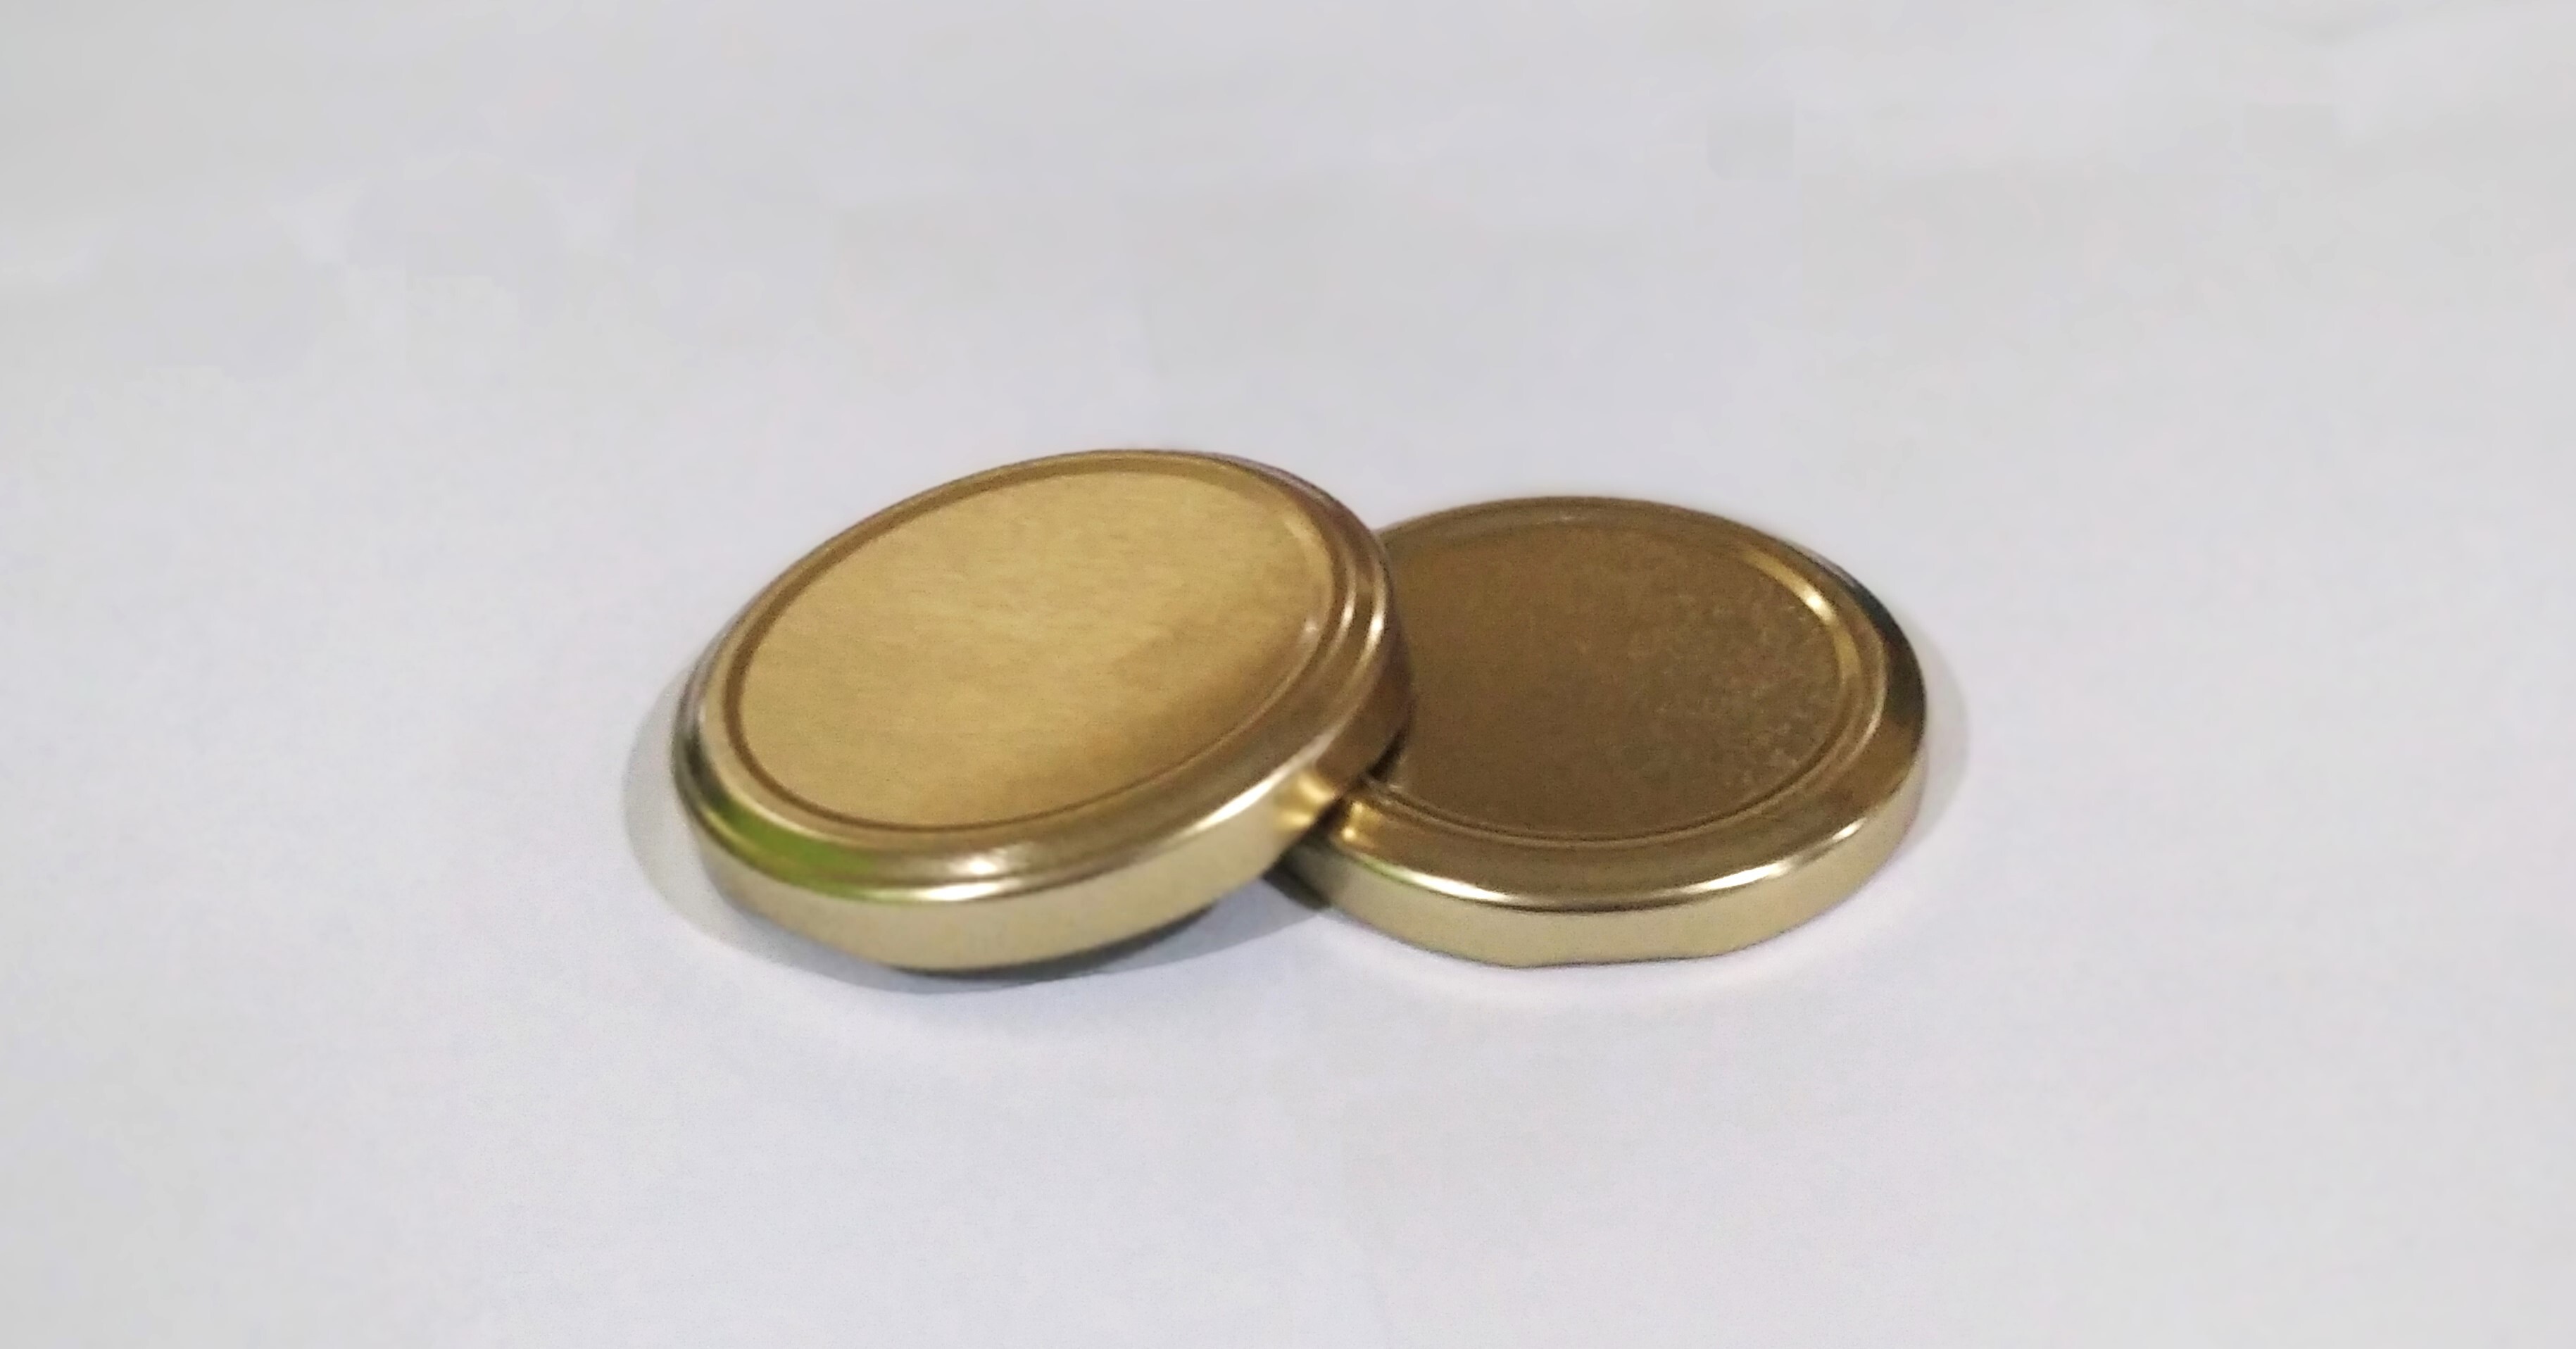 63mm Plain Gold And Silver LUG CAPS